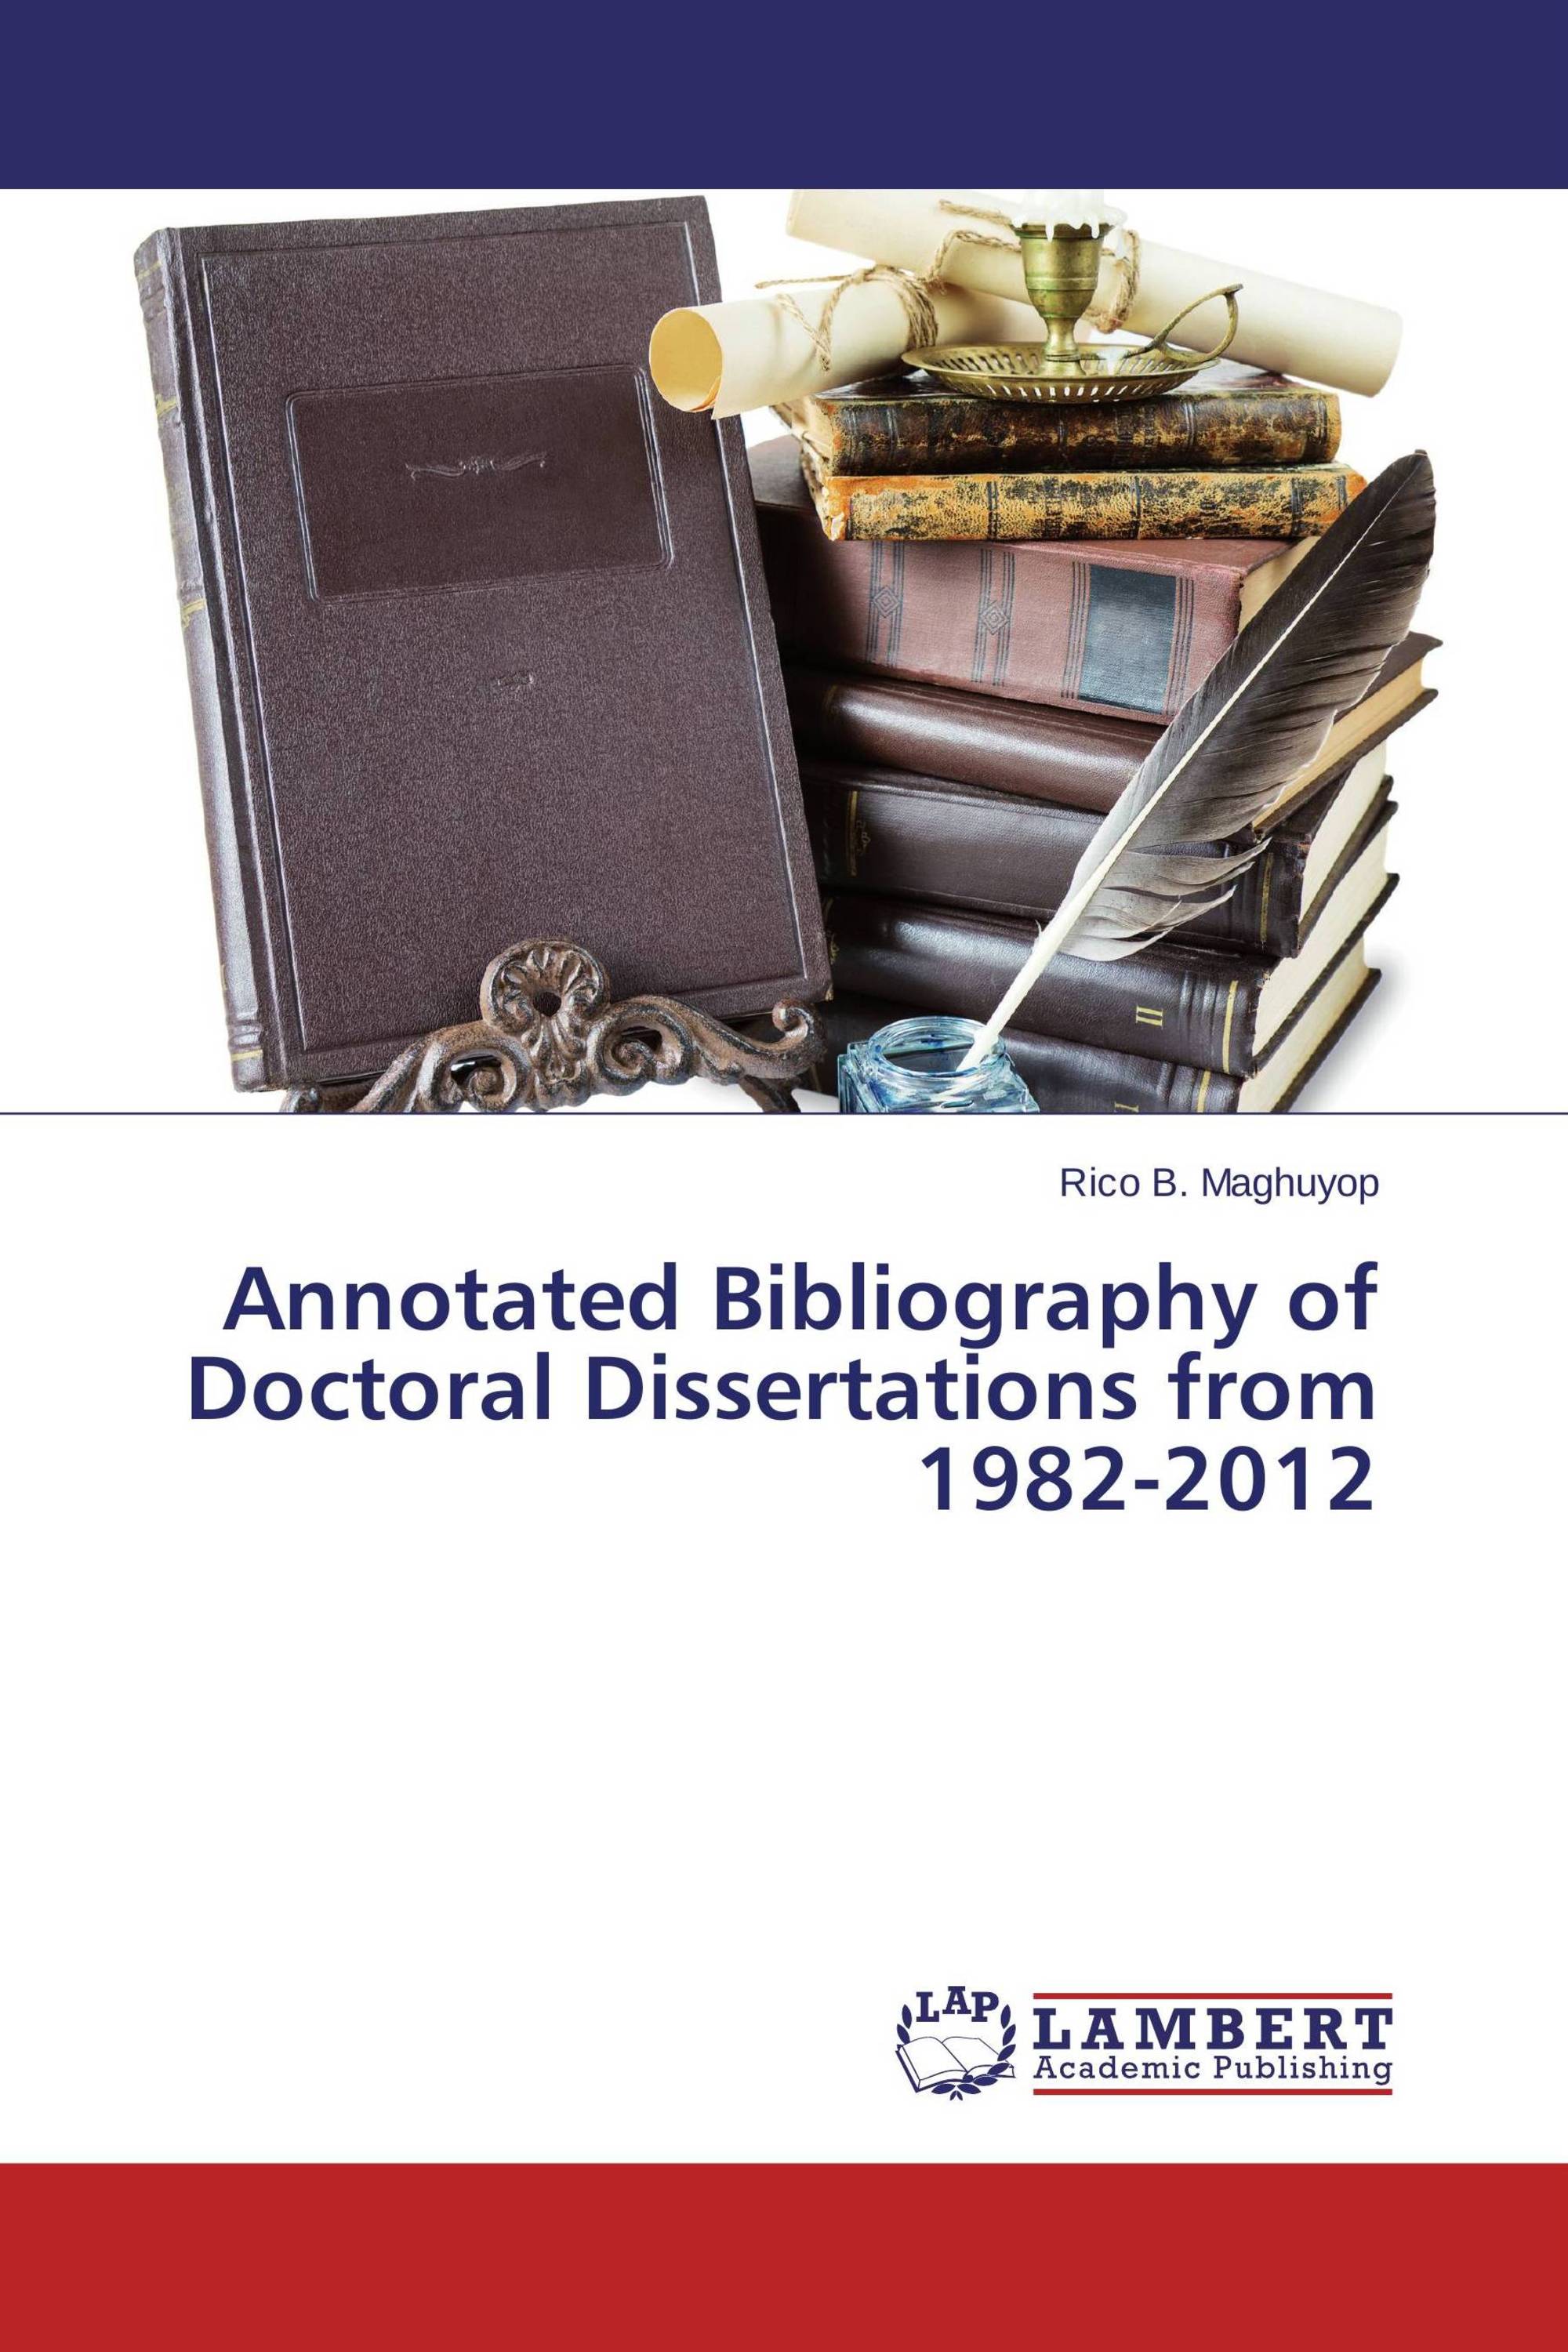 types of doctoral dissertations